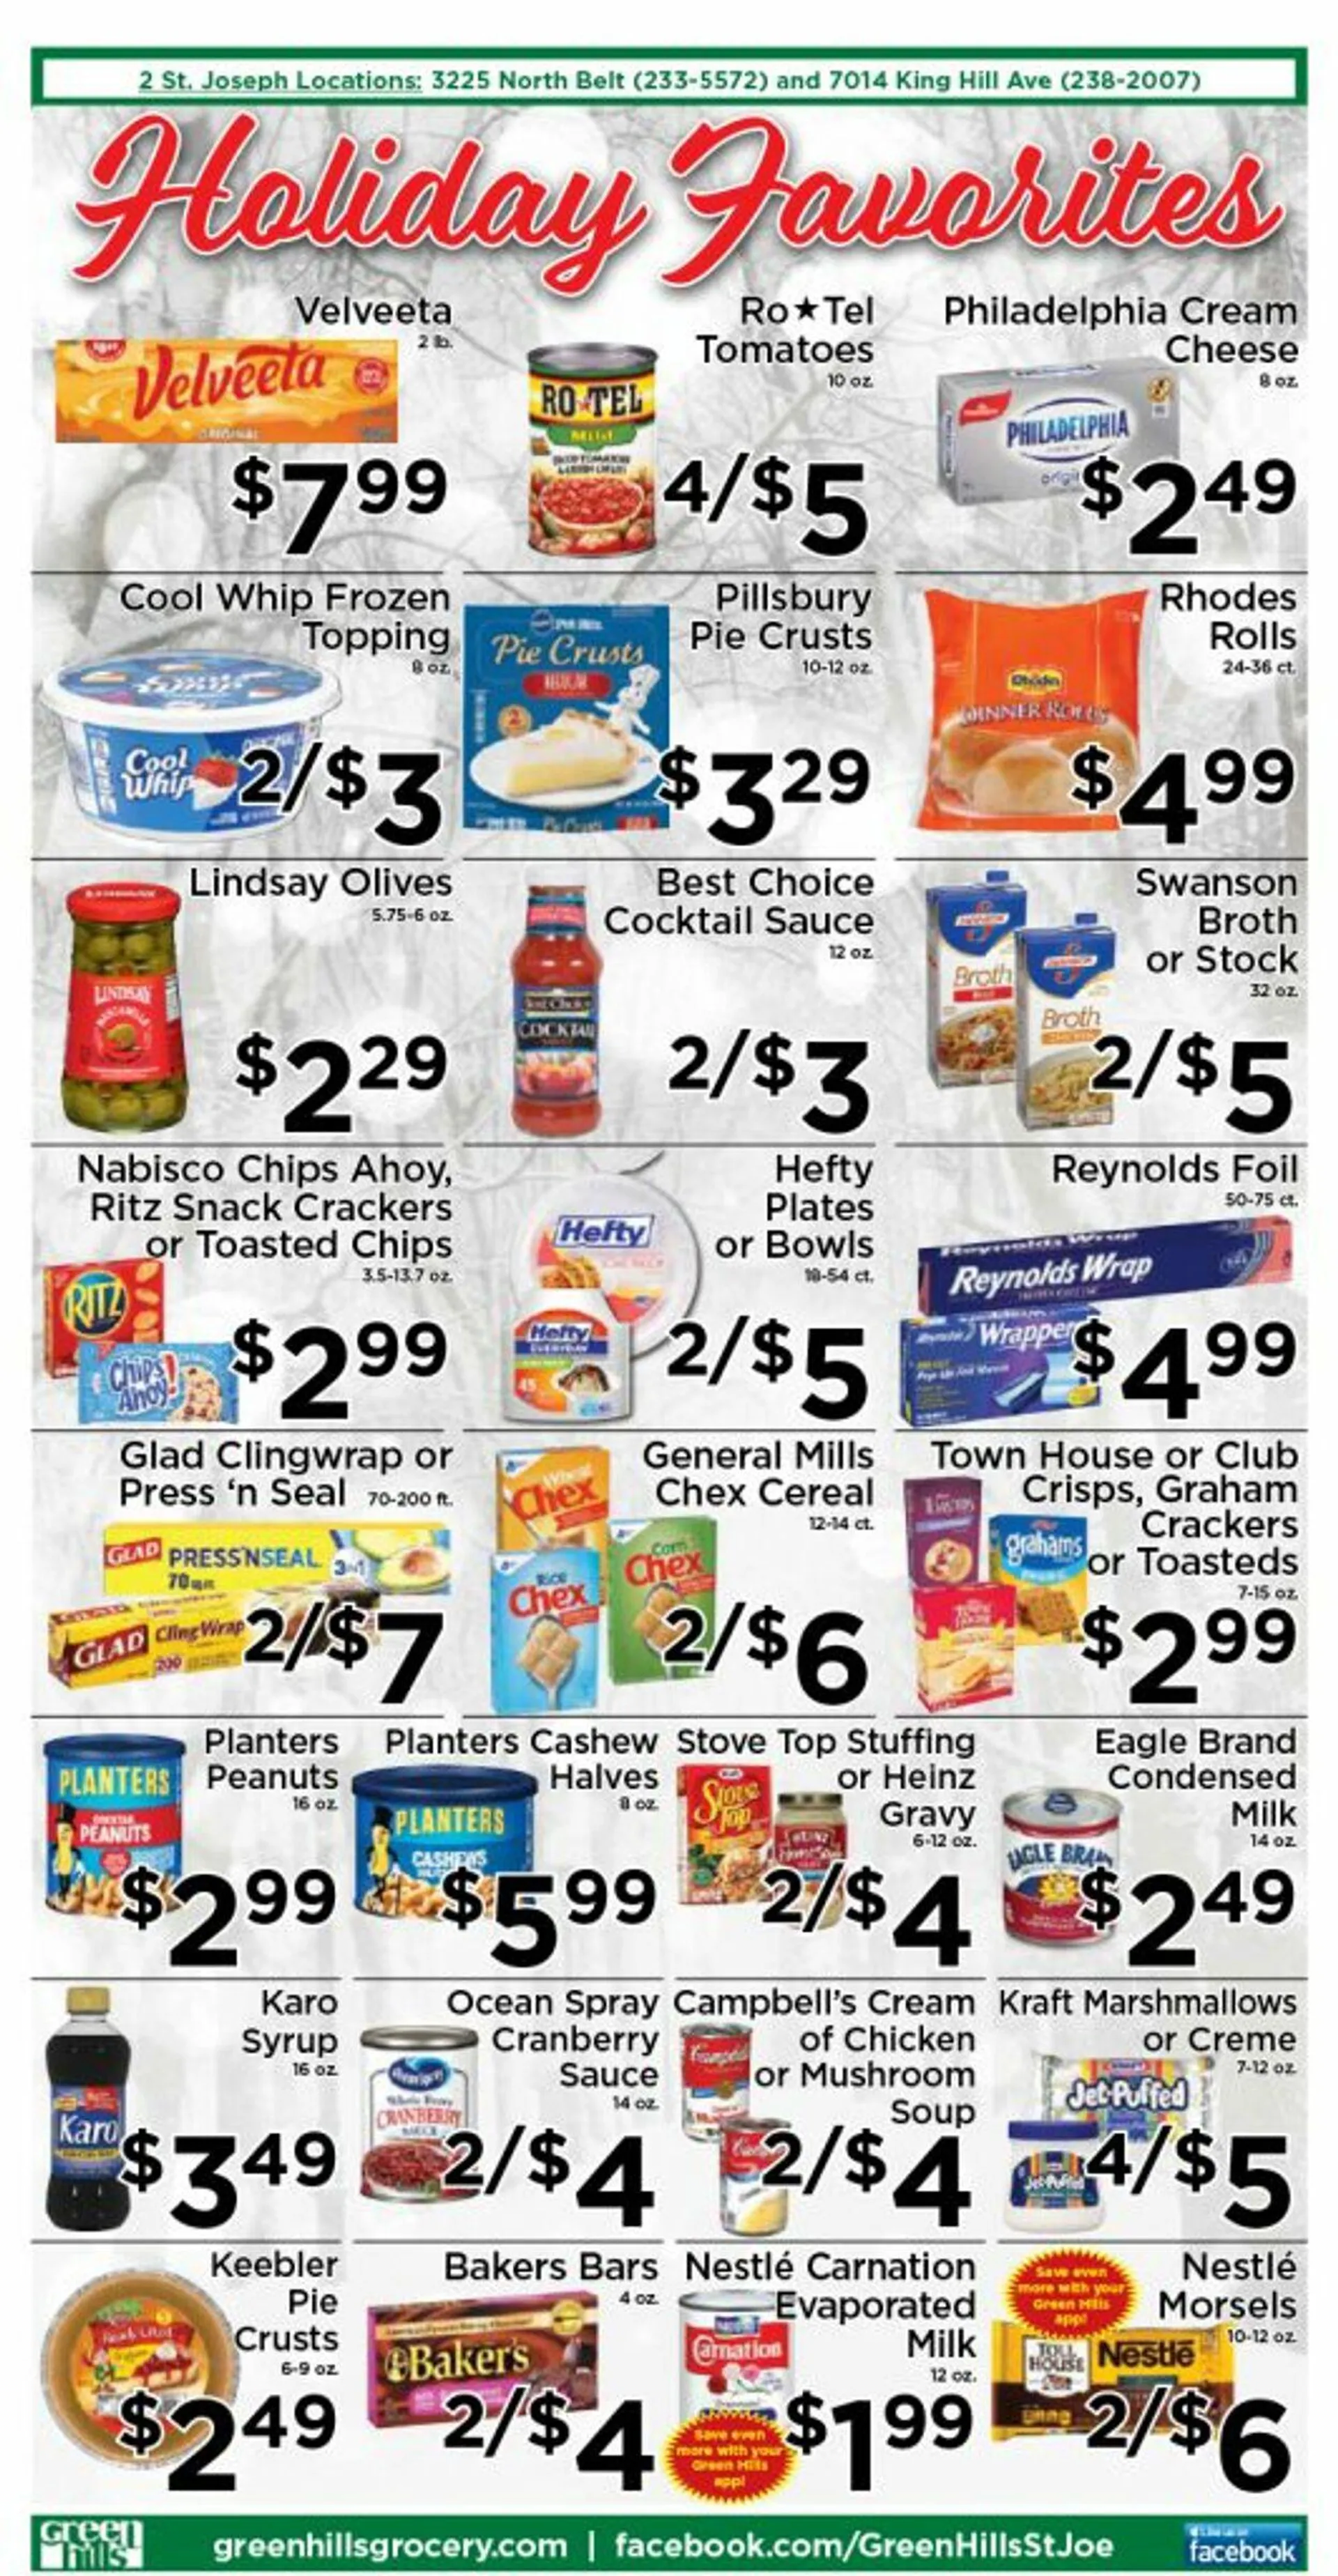 Green Hills Grocery Current weekly ad - 7